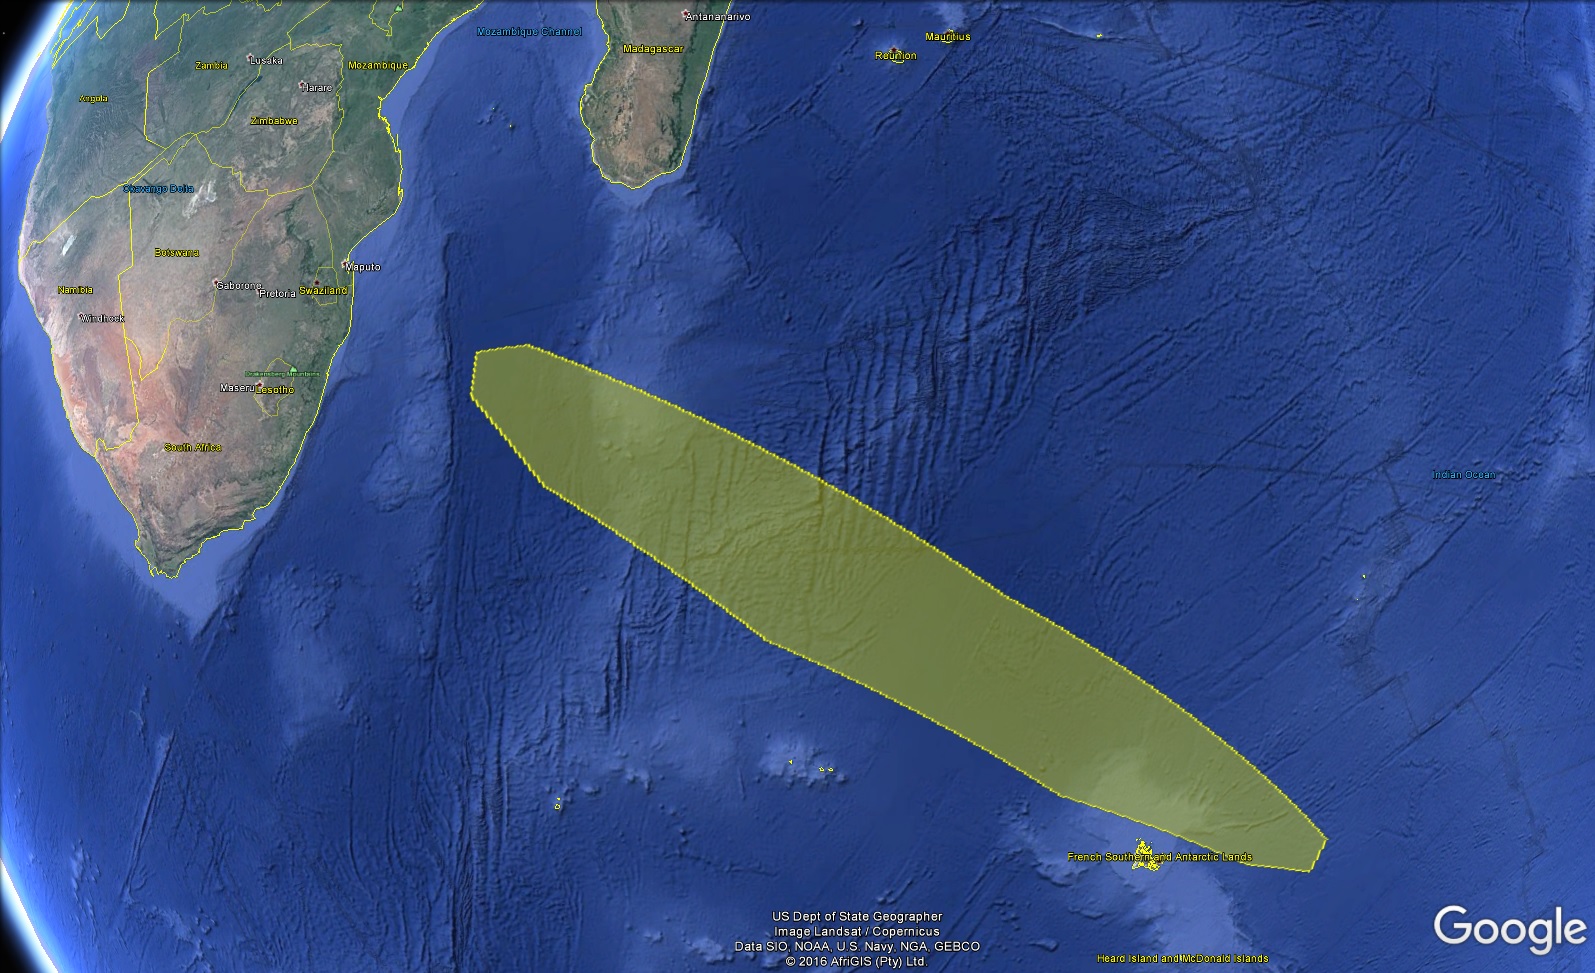 Stage 2 Impact Zone - Image: Google Earth / Spaceflight101